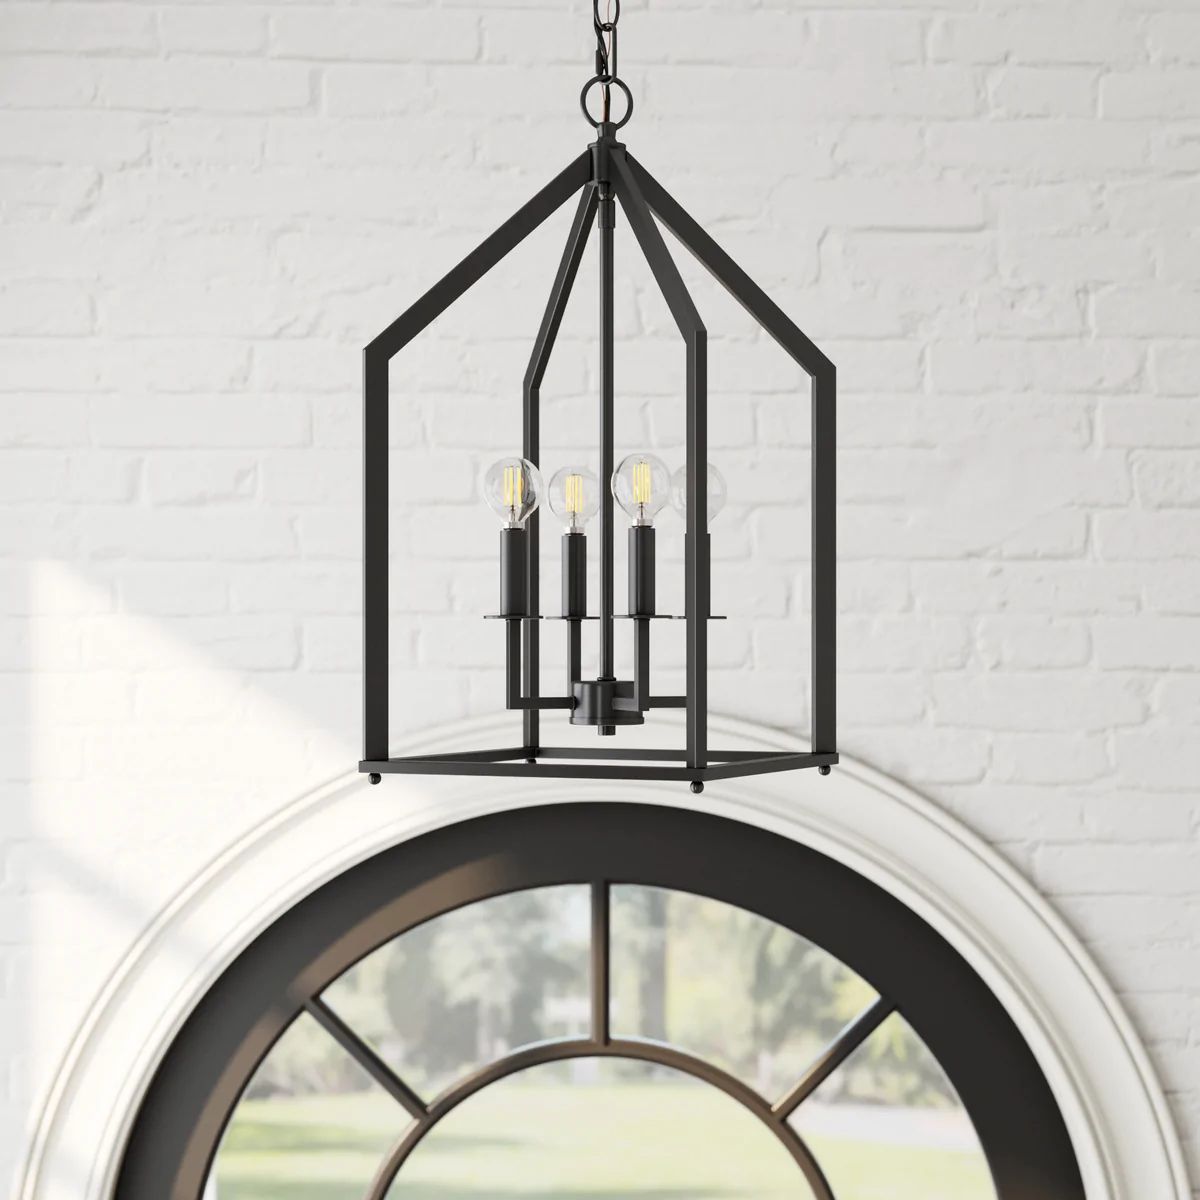 Skye Farmhouse Ceiling Mount | 4-Light Pendant Fixture | With Black Metal Cage Shade for Kitchen ... | Nathan James